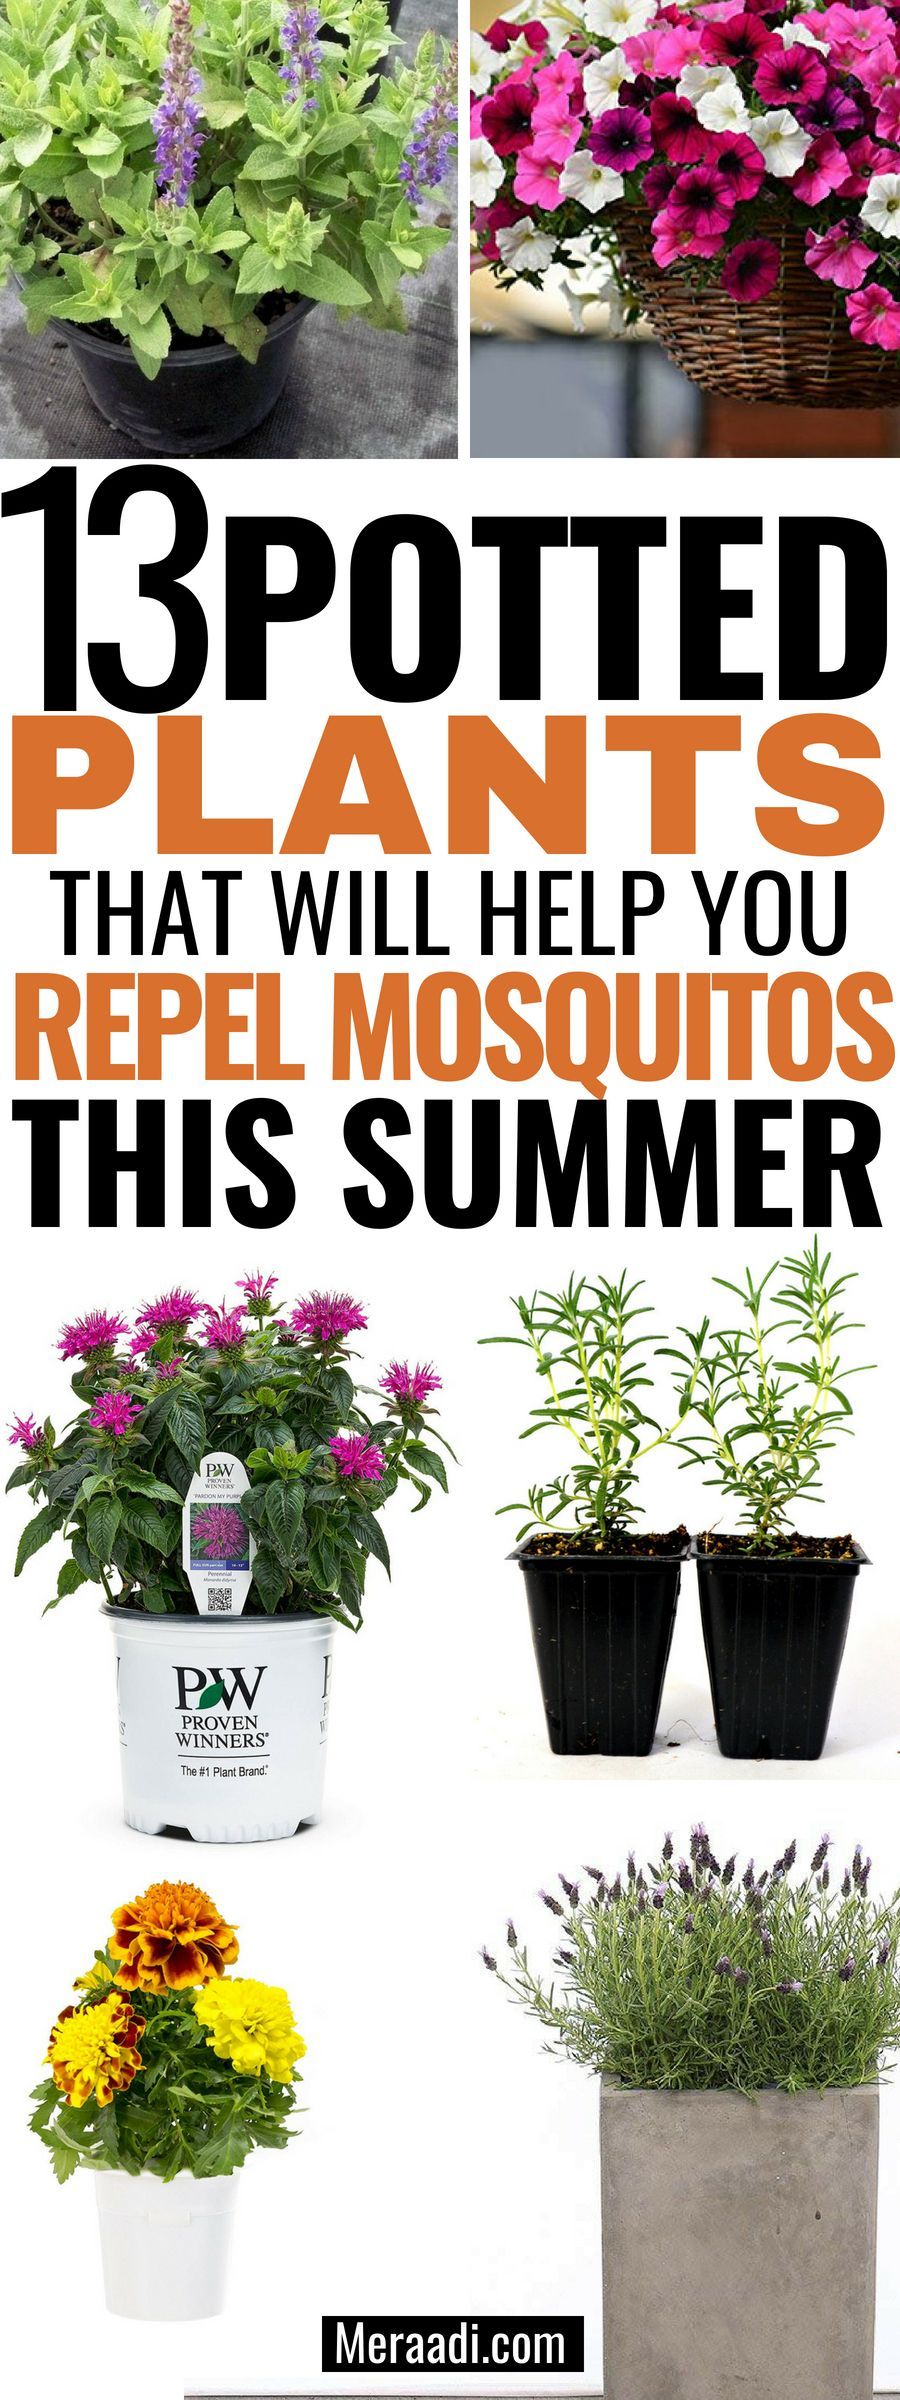 13 Potted Plants That Repel Mosquitos -   21 plants Potted tips ideas